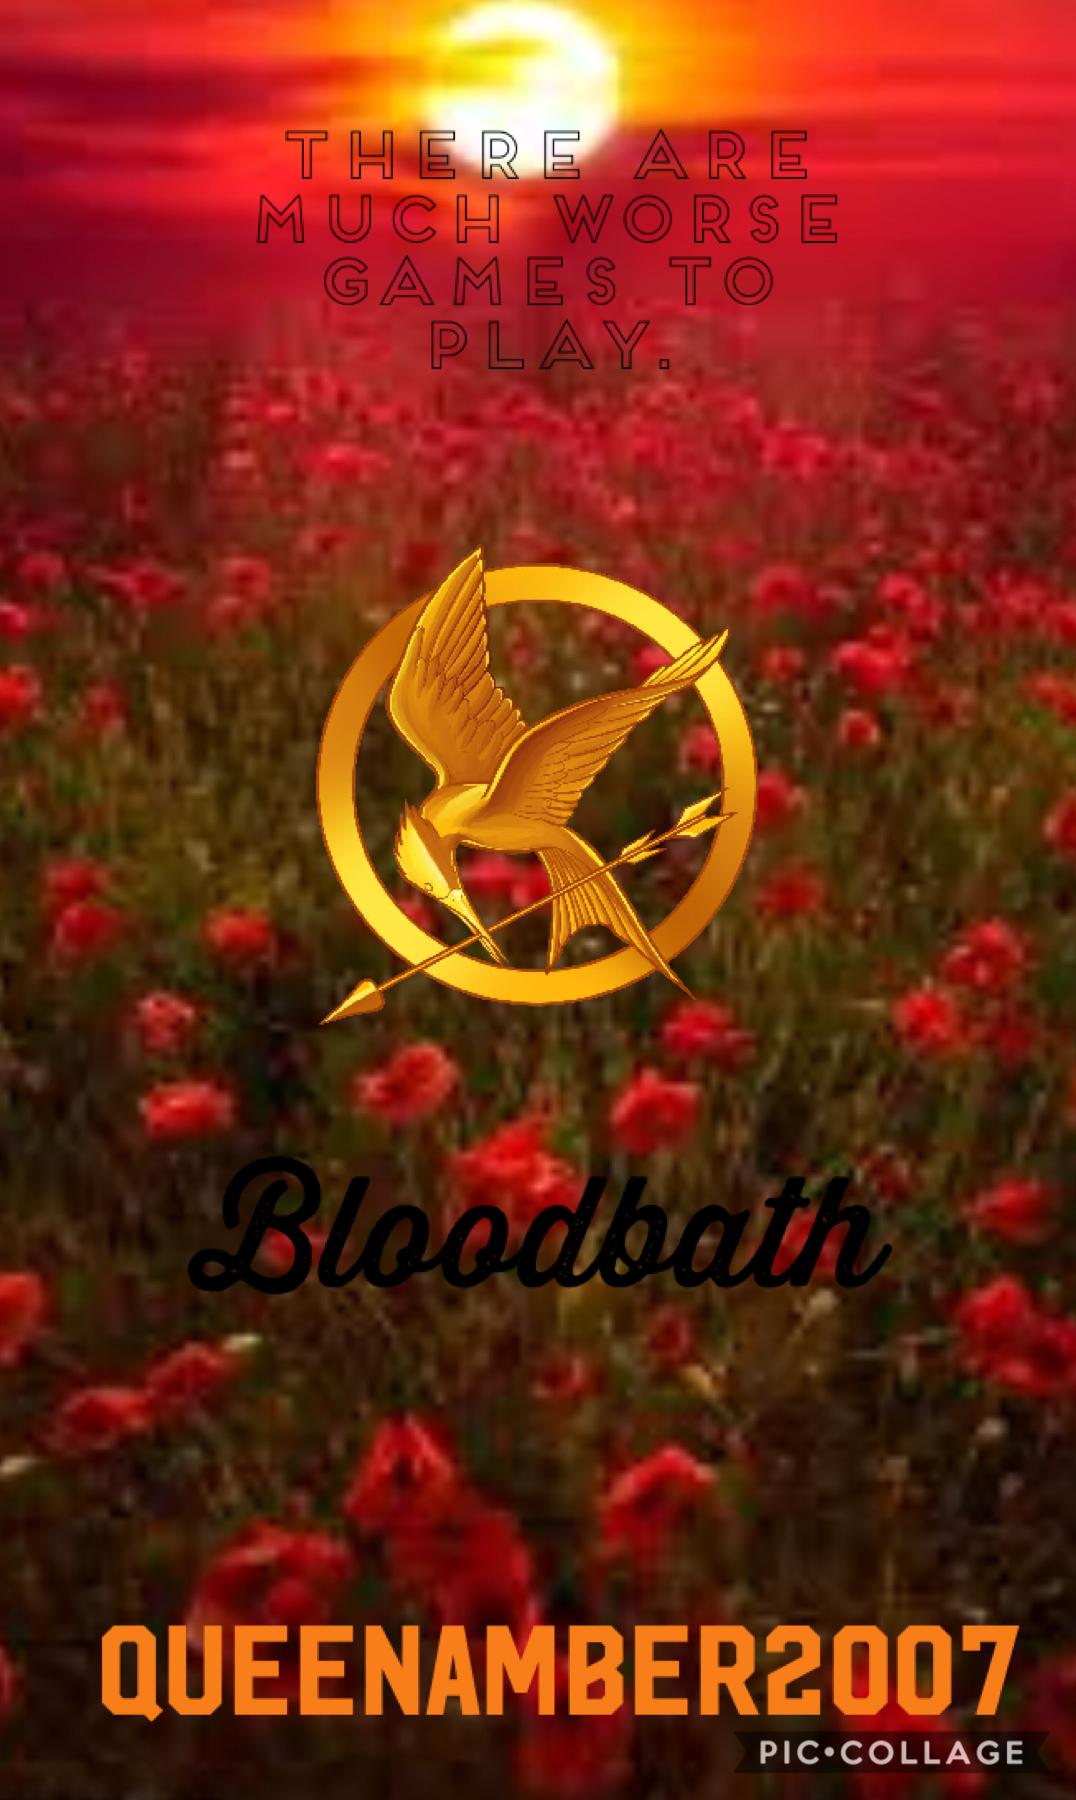 A Cover another of my books, Bloodbath! This is from the 60th hunger games. Basically, about a girl named Lux who gets reaped. You’ll like it!

My profile on Wattpad is @QueenAmber2007 